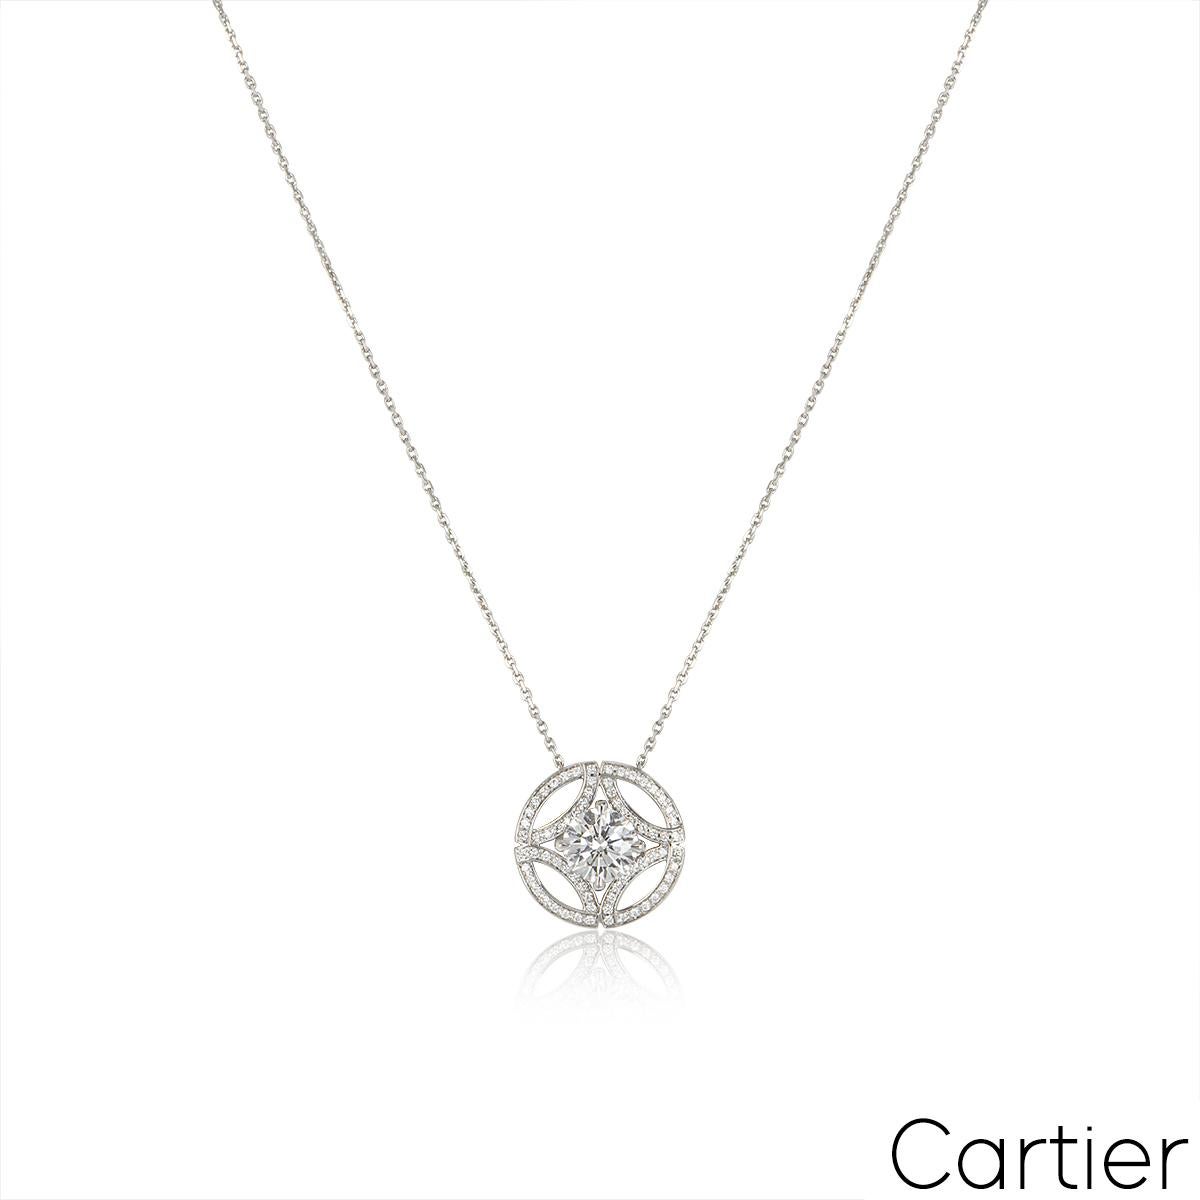 A stunning 18k white gold pendant by Cartier from the Galanterie de Cartier collection N7424173 . The pendant is set to the centre in a 4 claw mount with a round brilliant cut diamond weighing 1.55ct, E colour and VS2 clarity. The pendant is further